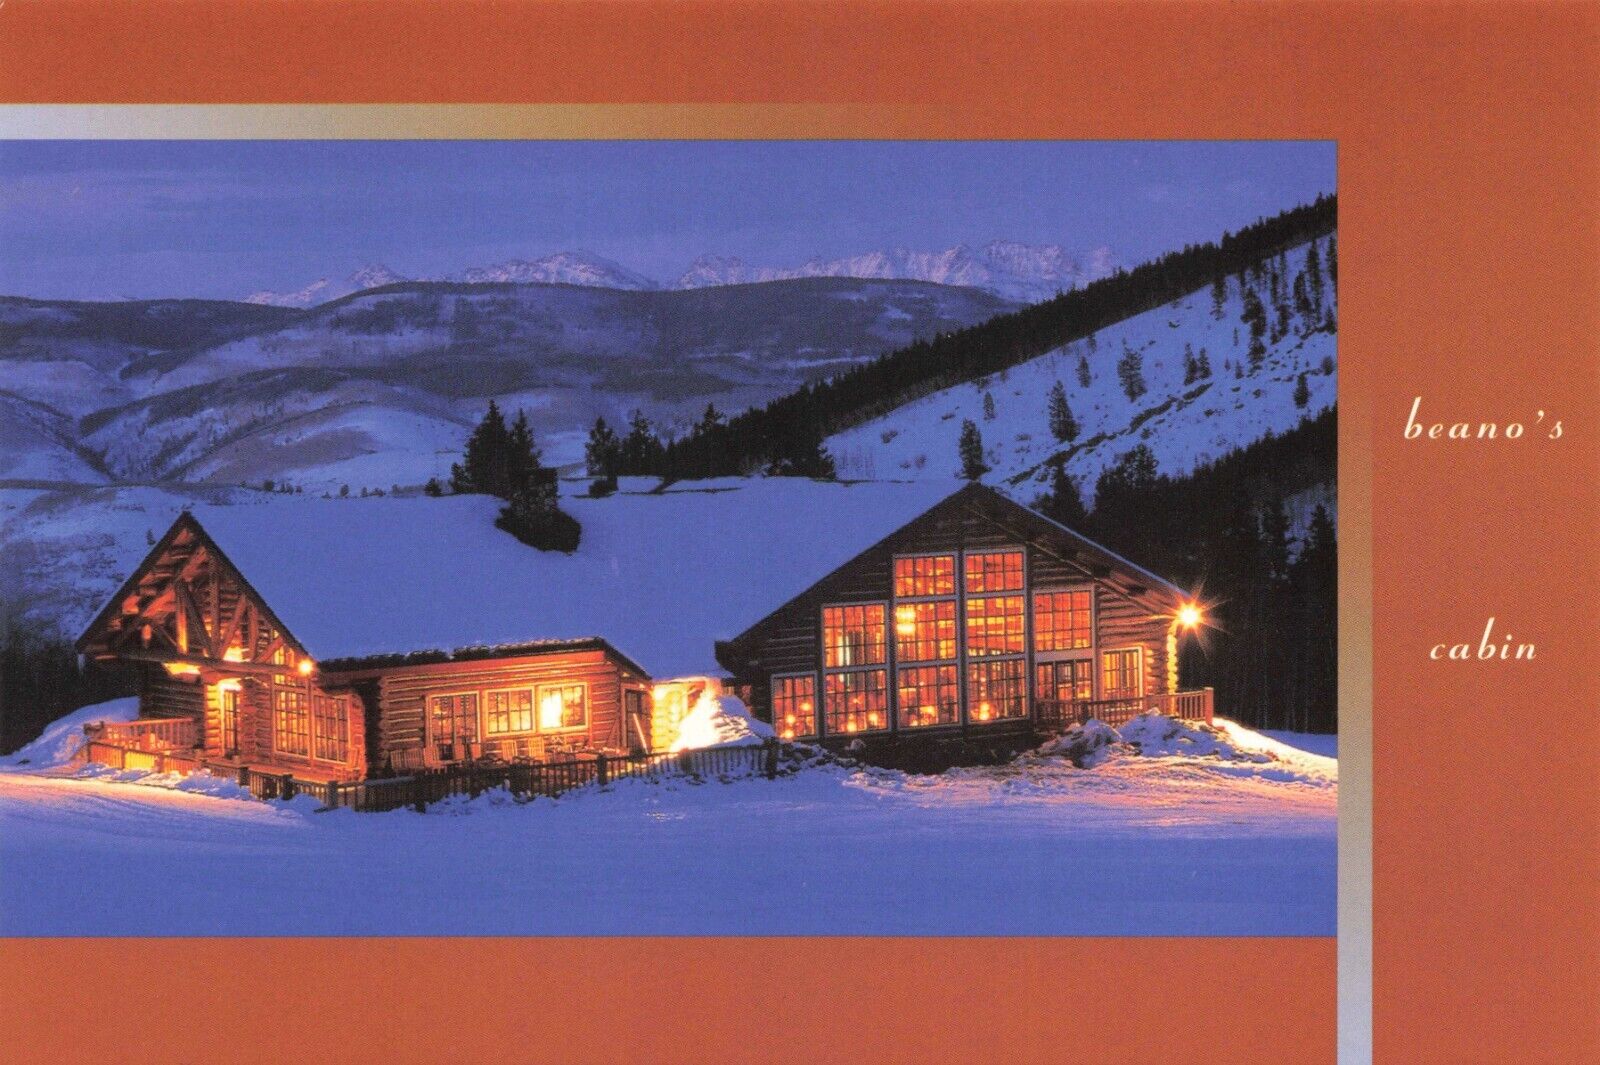 Postcard CO Vail Valley Rocky Mountains Beano\'s Cabin Snow c1996 by Jack Affleck